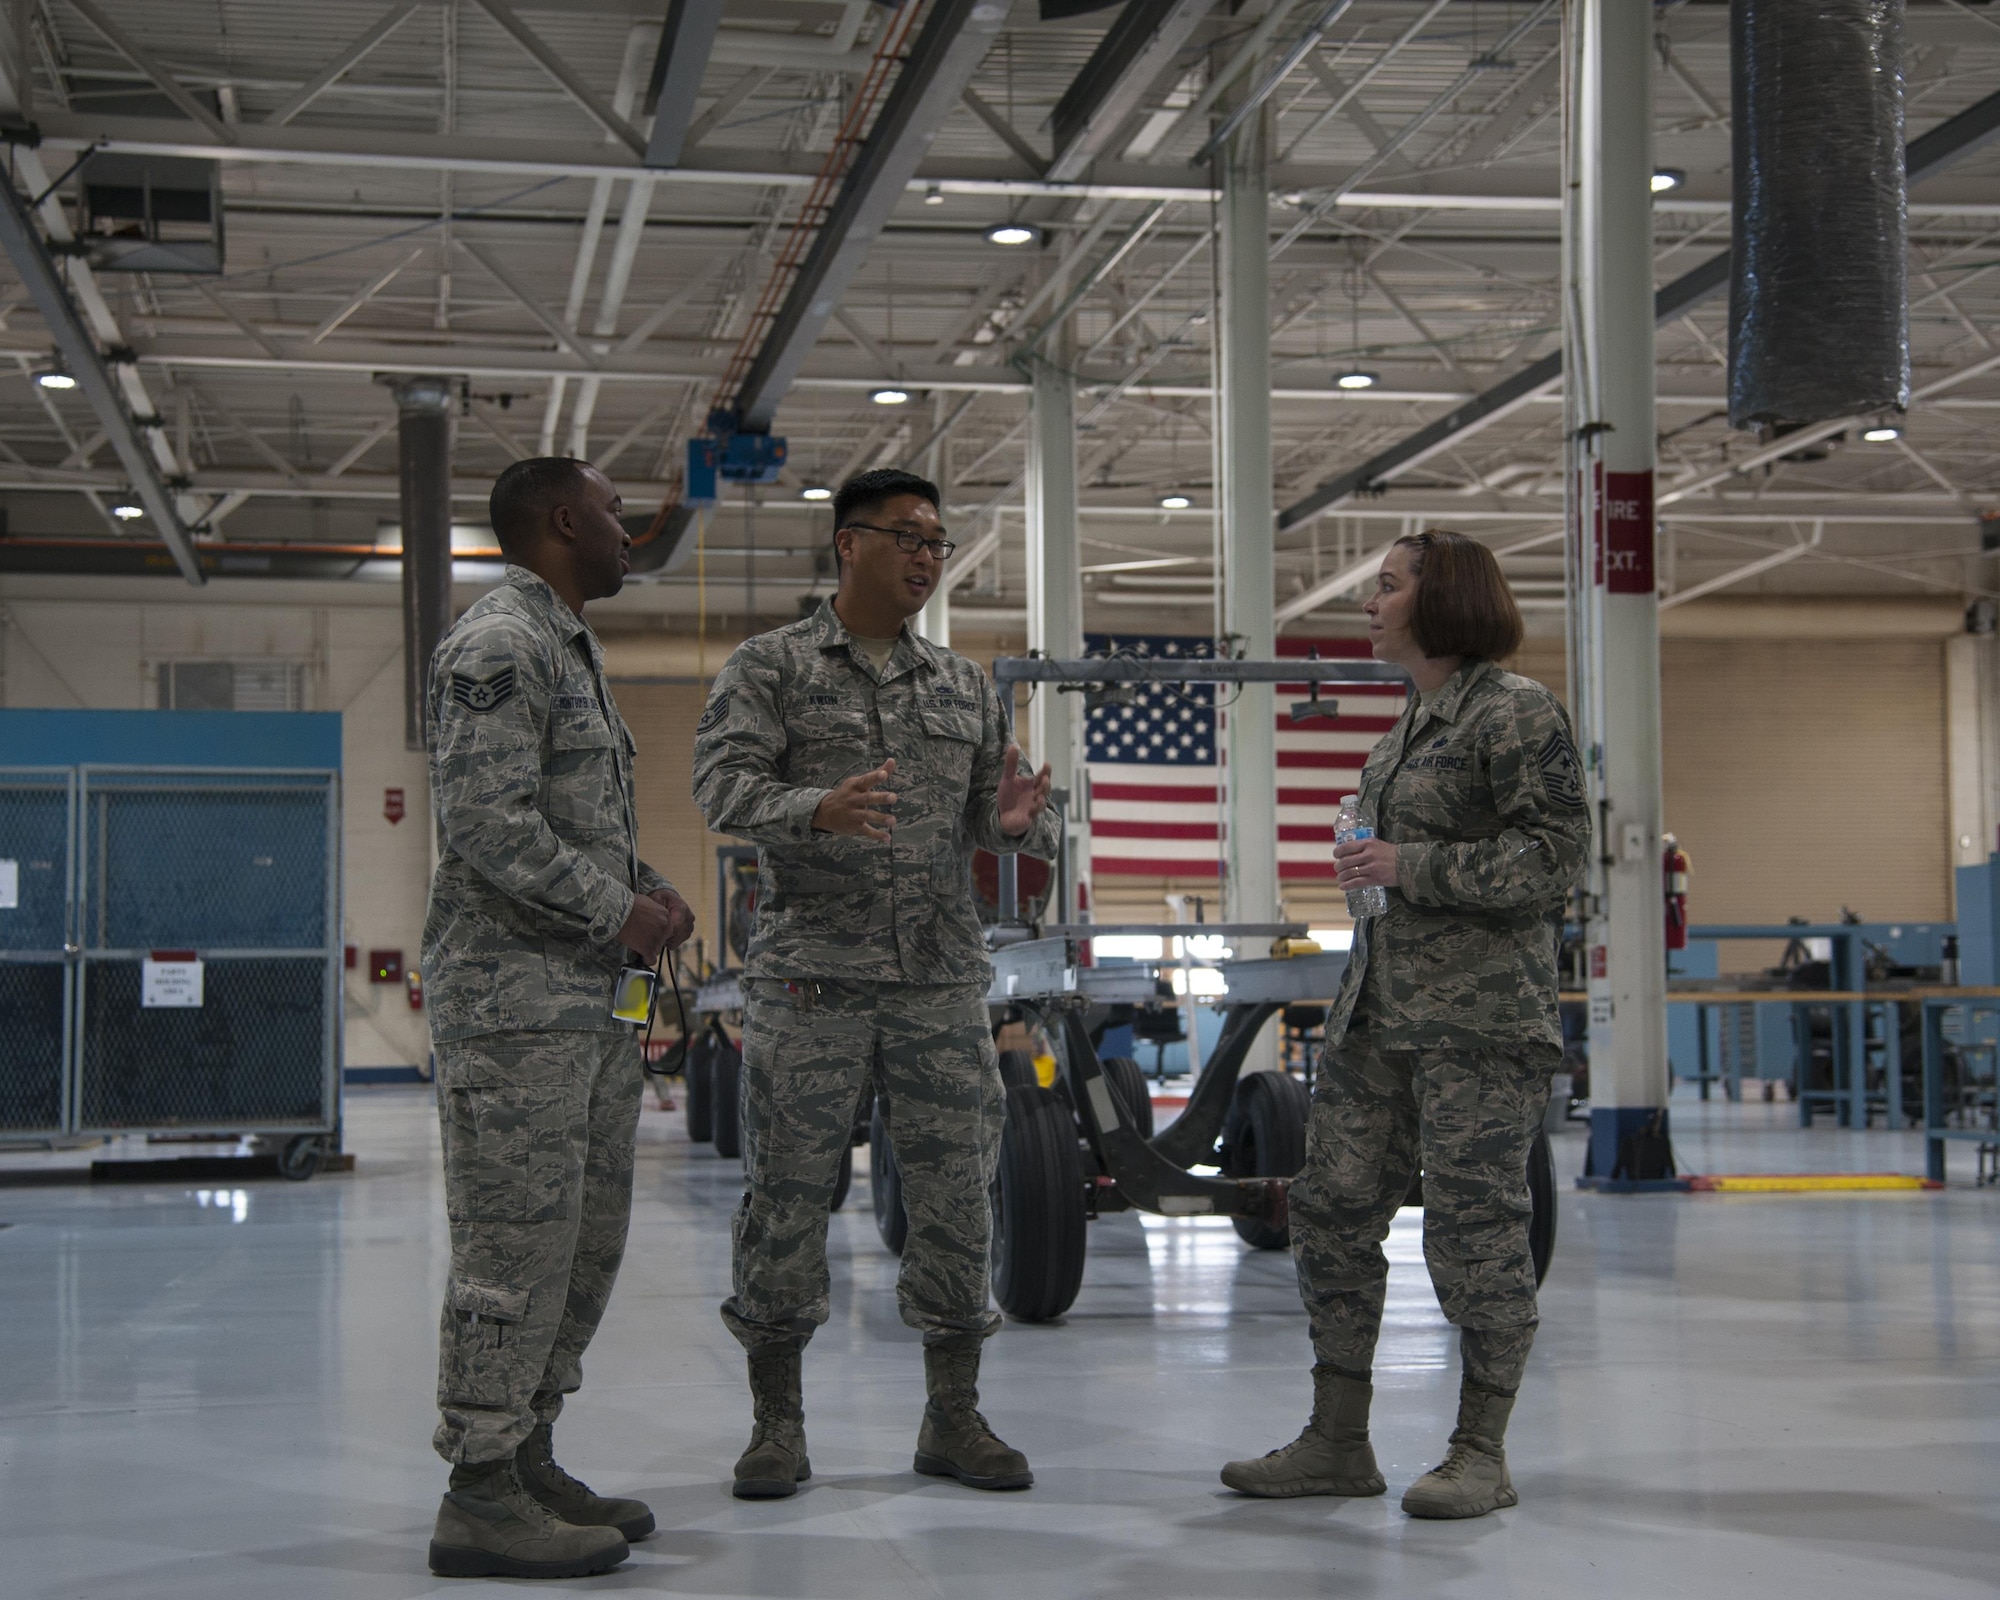 U.S. Air Force Chief Master Sgt. Juliet Gudgel, command chief master sergeant of Air Education and Training Command, speaks with NCOs from the 58th Special Operations Wing at Kirtland Air Force Base, N.M., Nov. 27, 2017. Gudgel visited the installation for two days to speak with the Airmen and gain a better understanding of what they do to support the 58th SOW, AETC and Air Force Special Operations Command. (U.S. Air Force photo by Staff Sgt. J.D. Strong II)